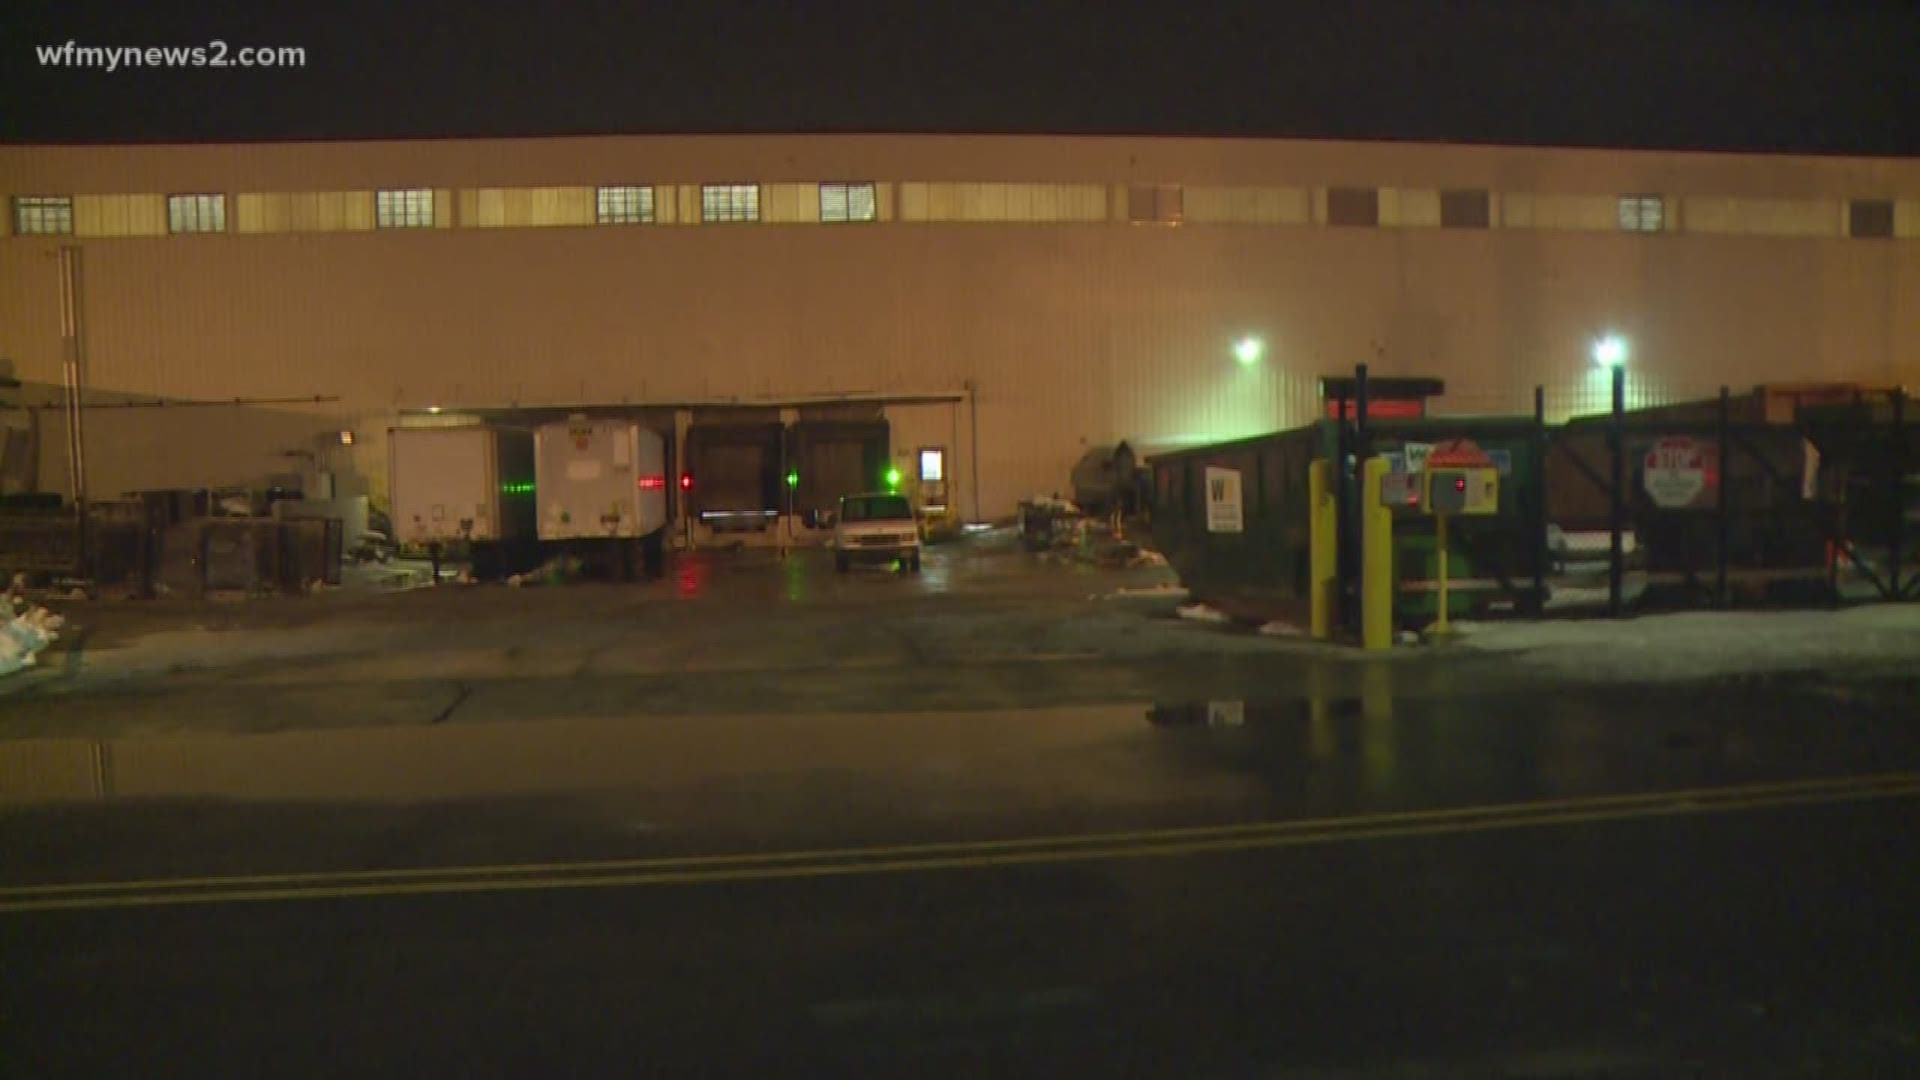 The fire department responded to the facility after a fire in the ventilation system.